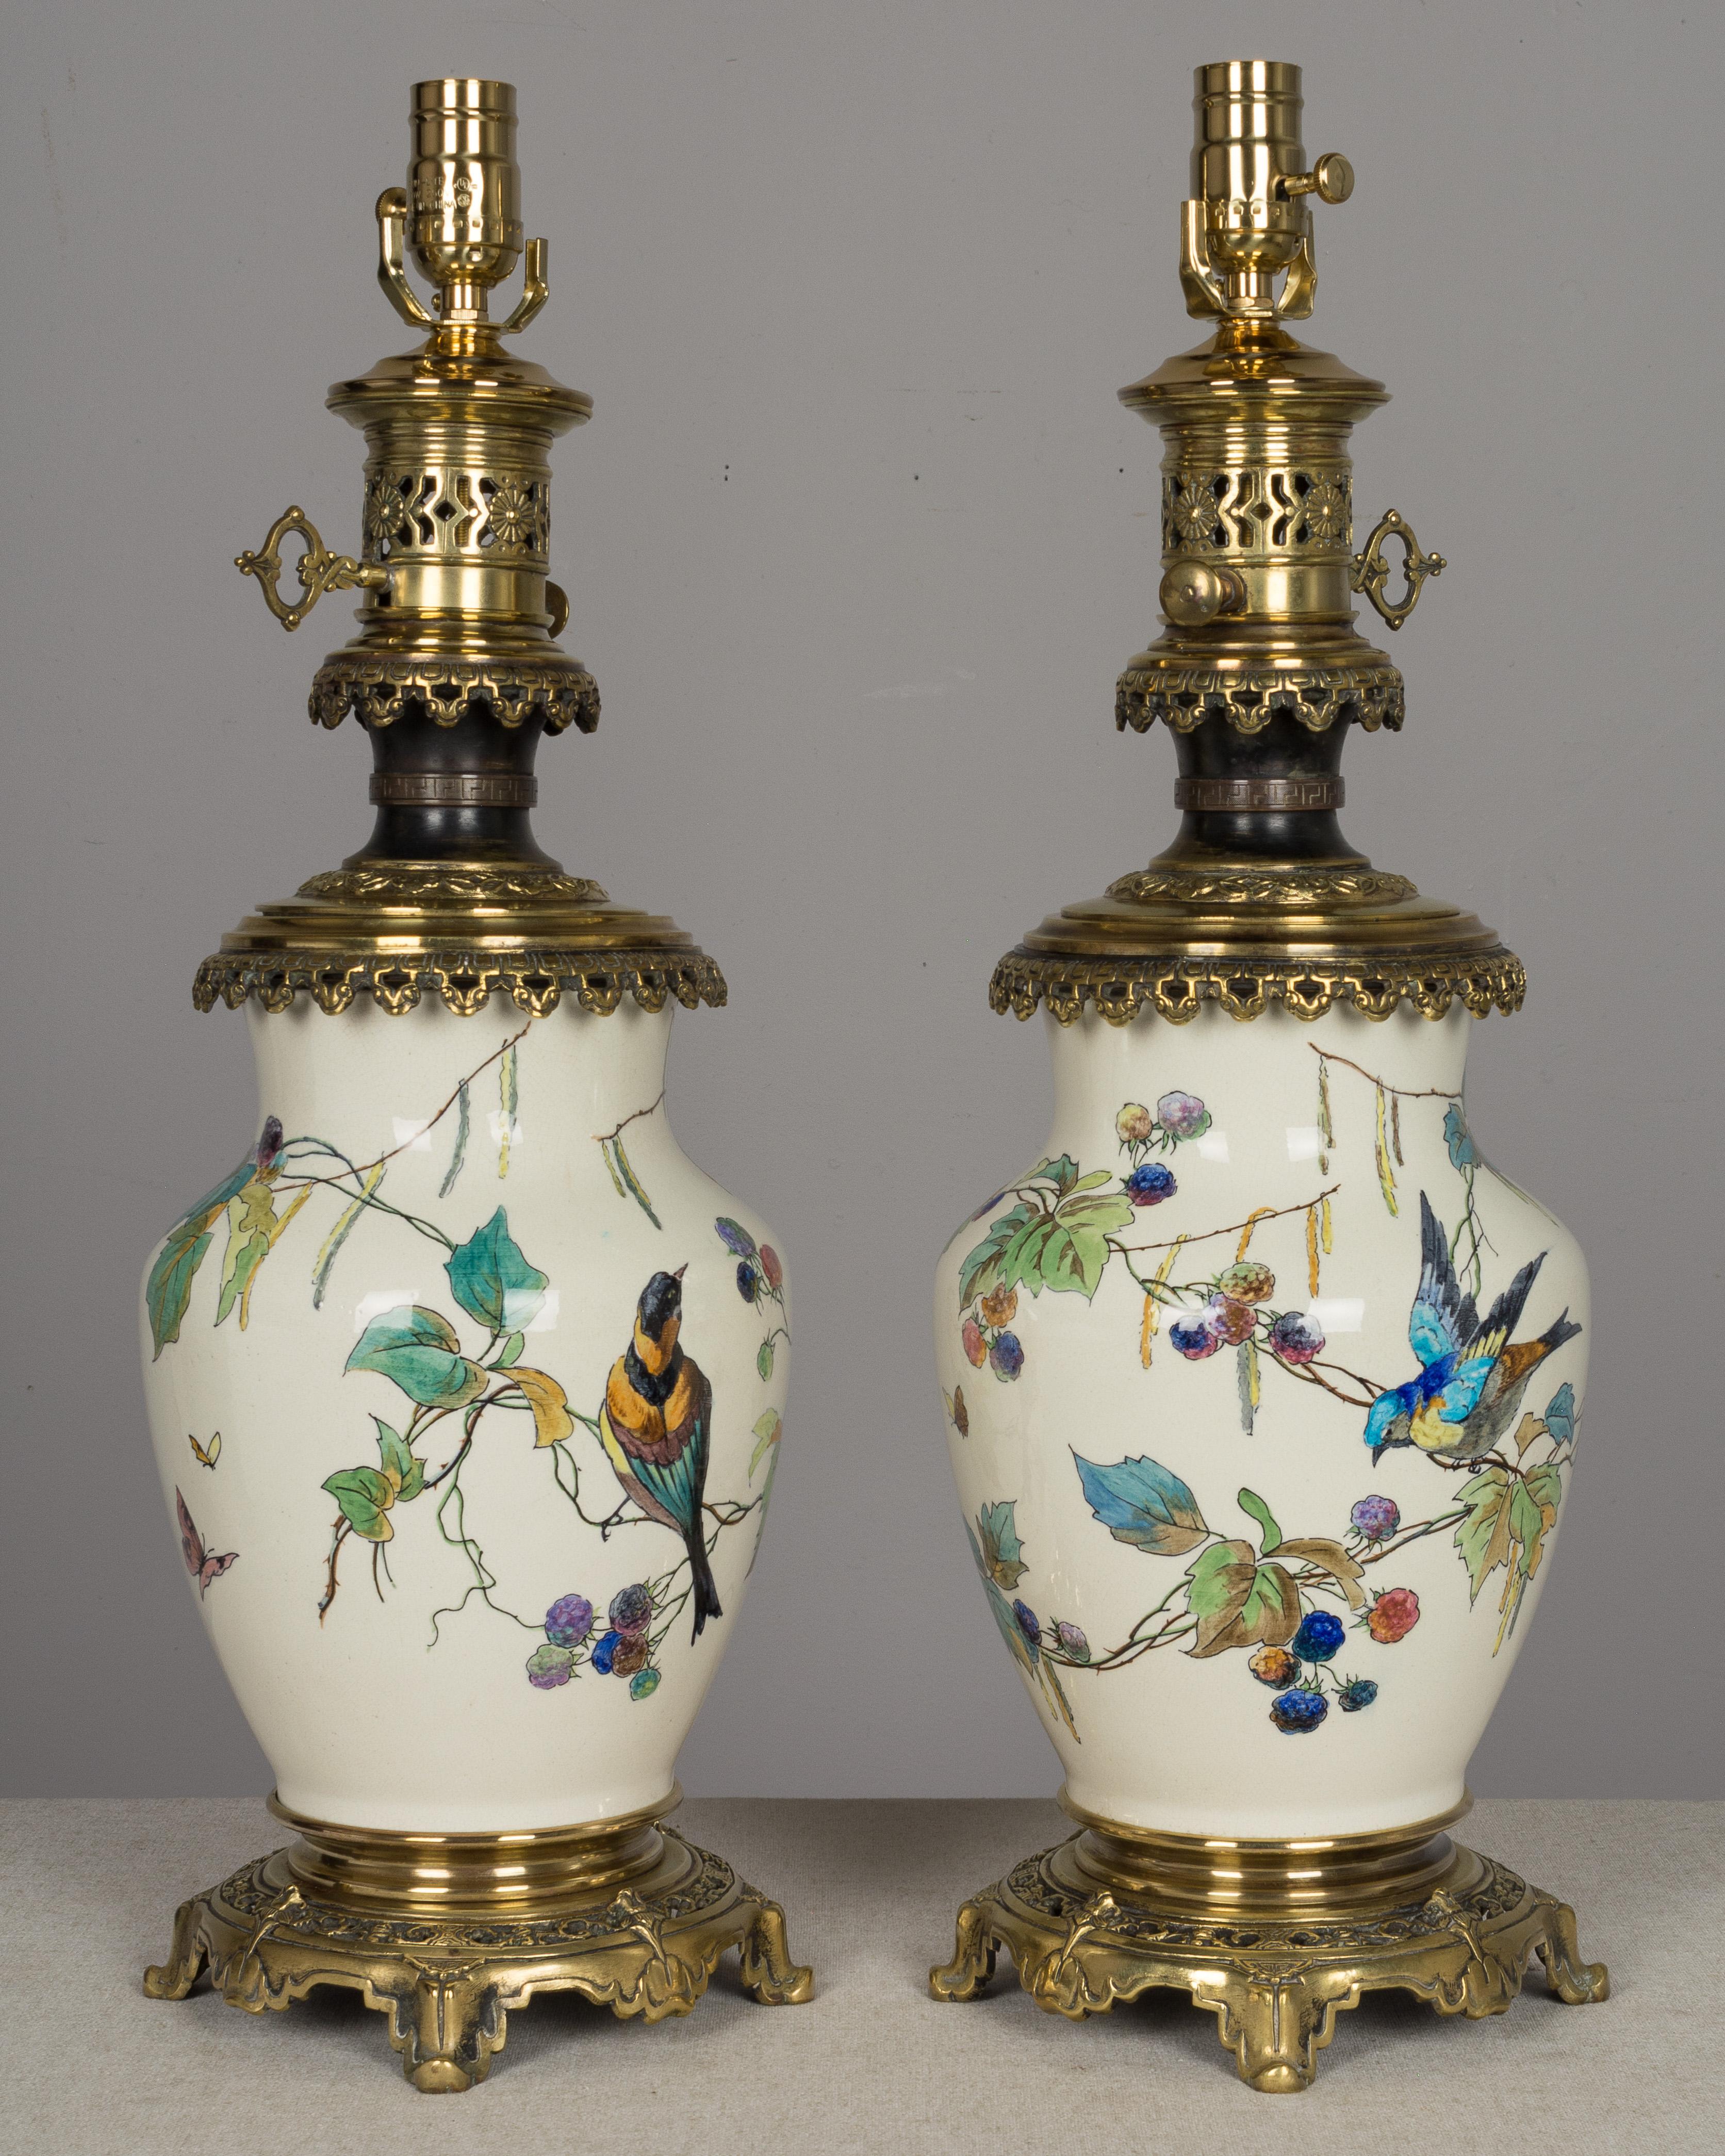 19th Century Pair of Bronze-Mounted Sevres Ceramic Lamps in the Manner of Theodore Deck